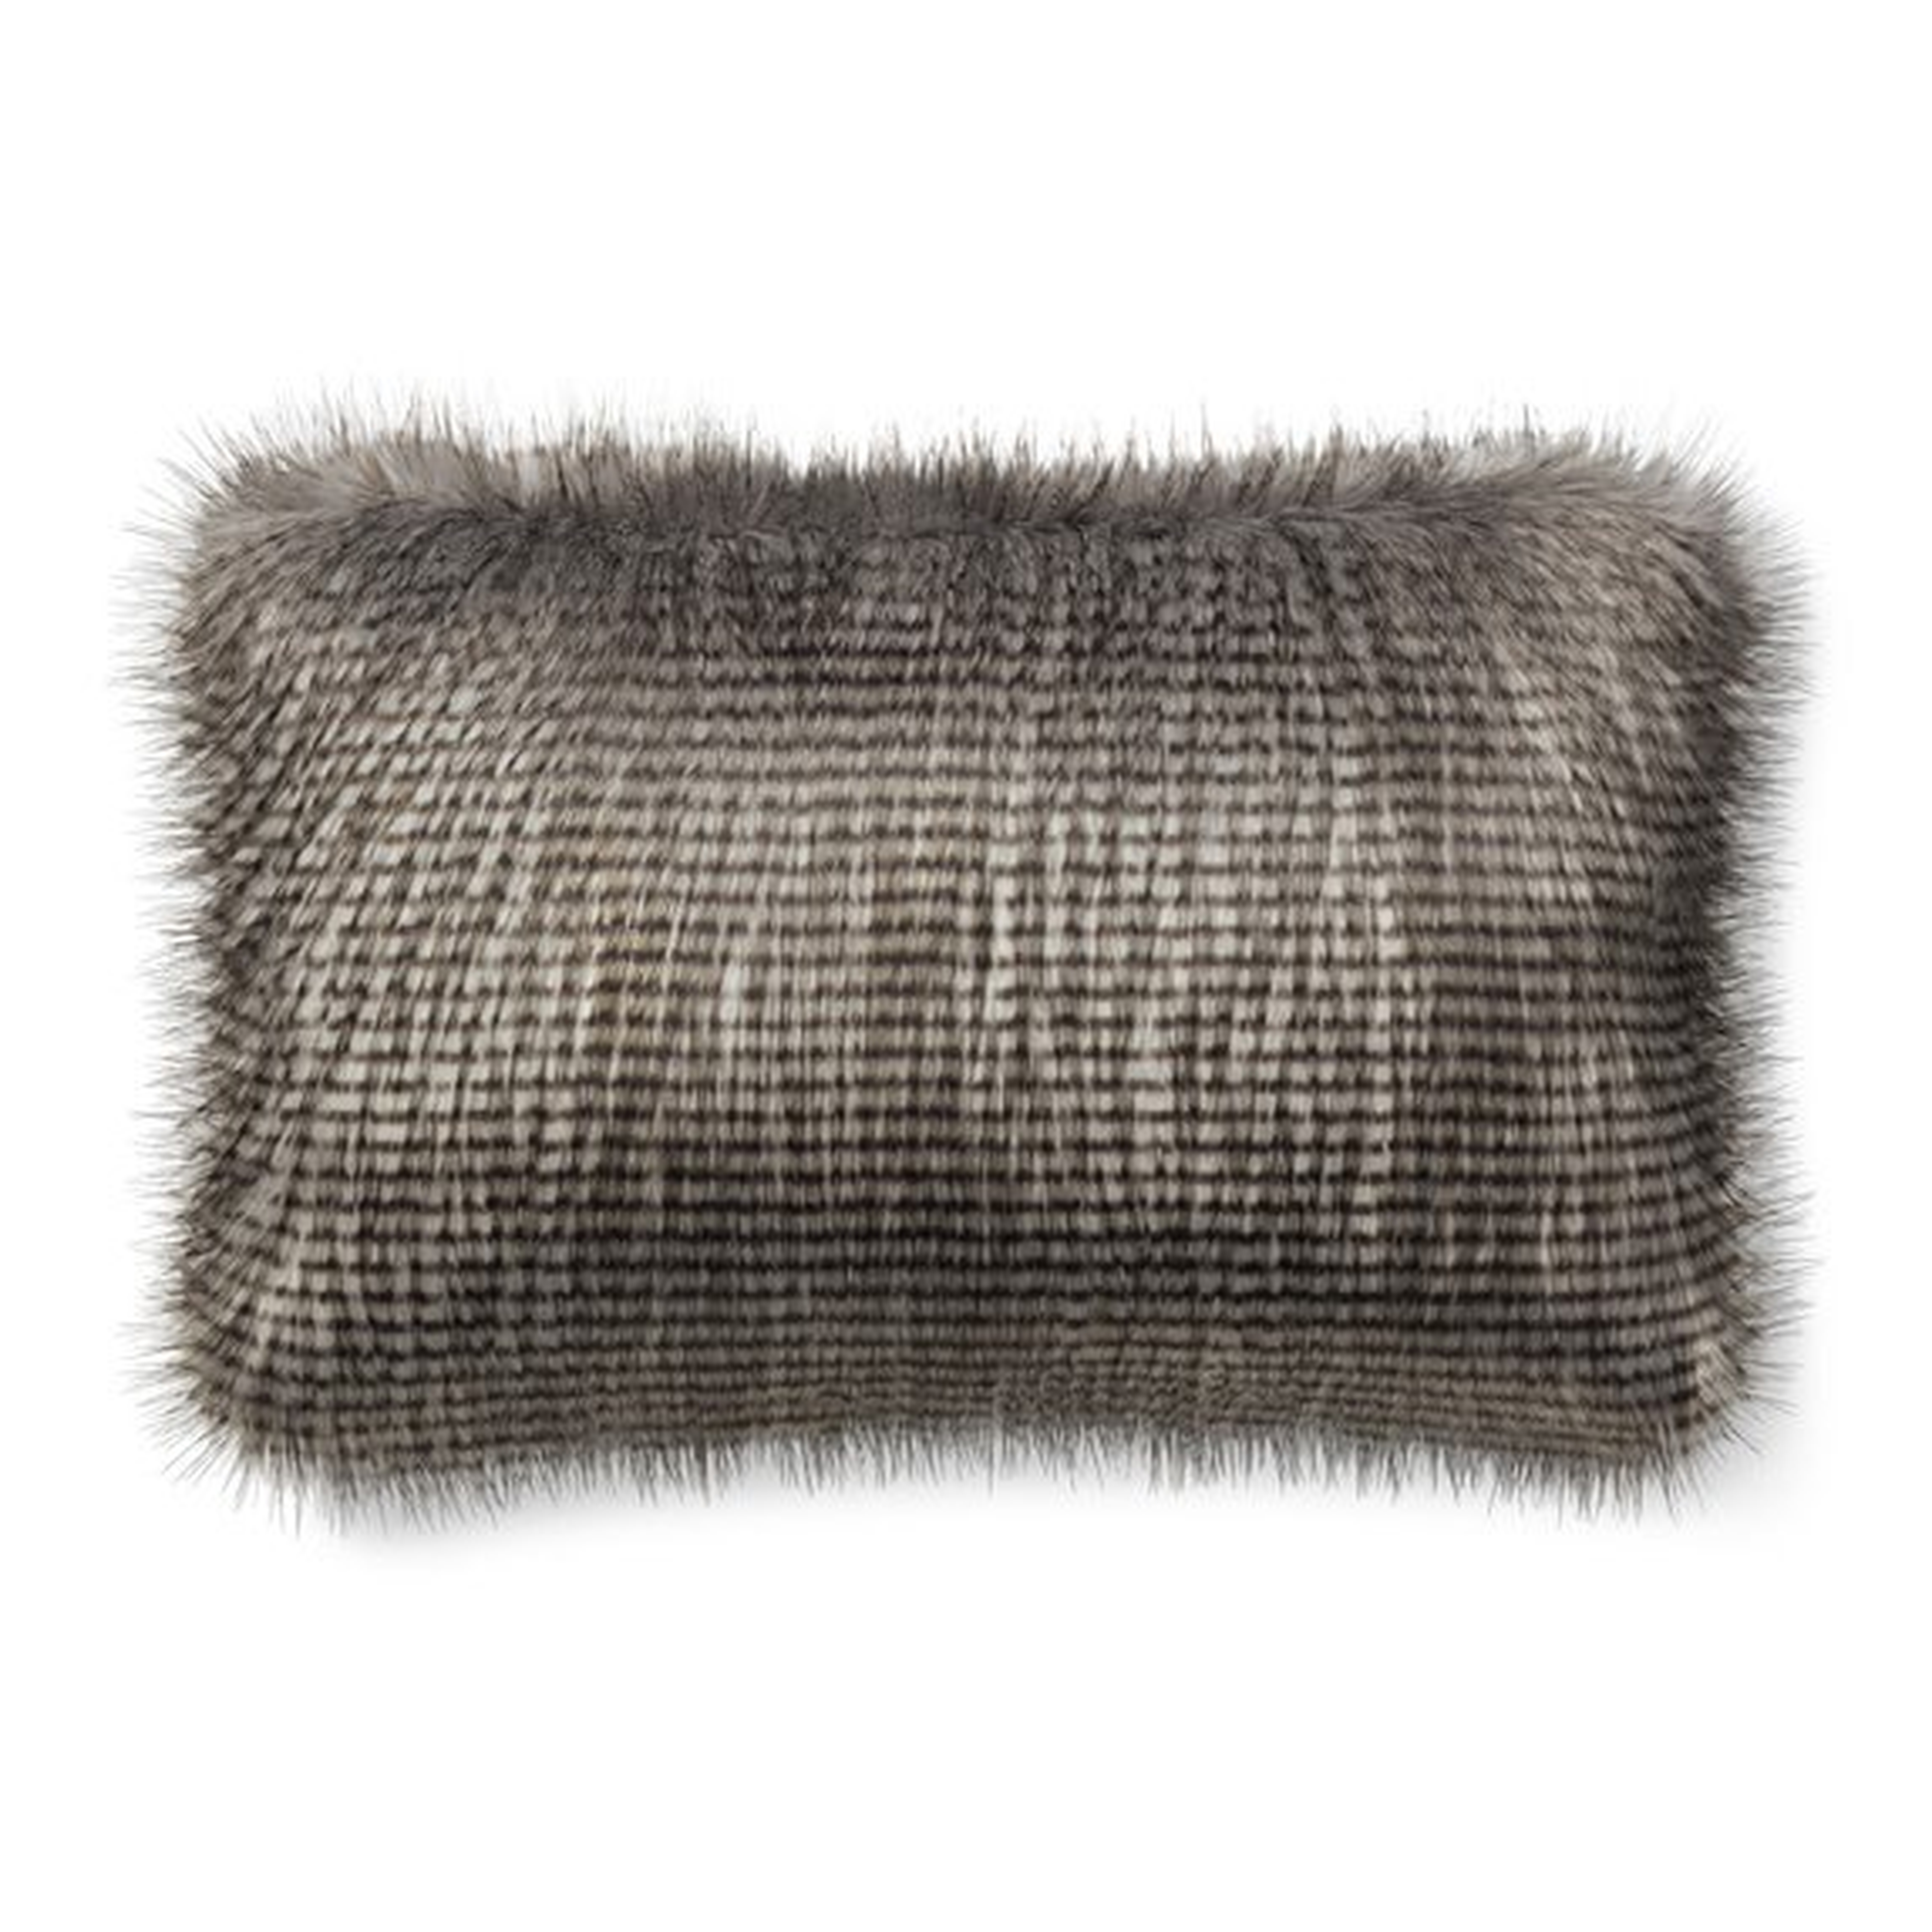 Faux Fur Lumbar Pillow Cover, Grey Owl Feather - Williams Sonoma Home